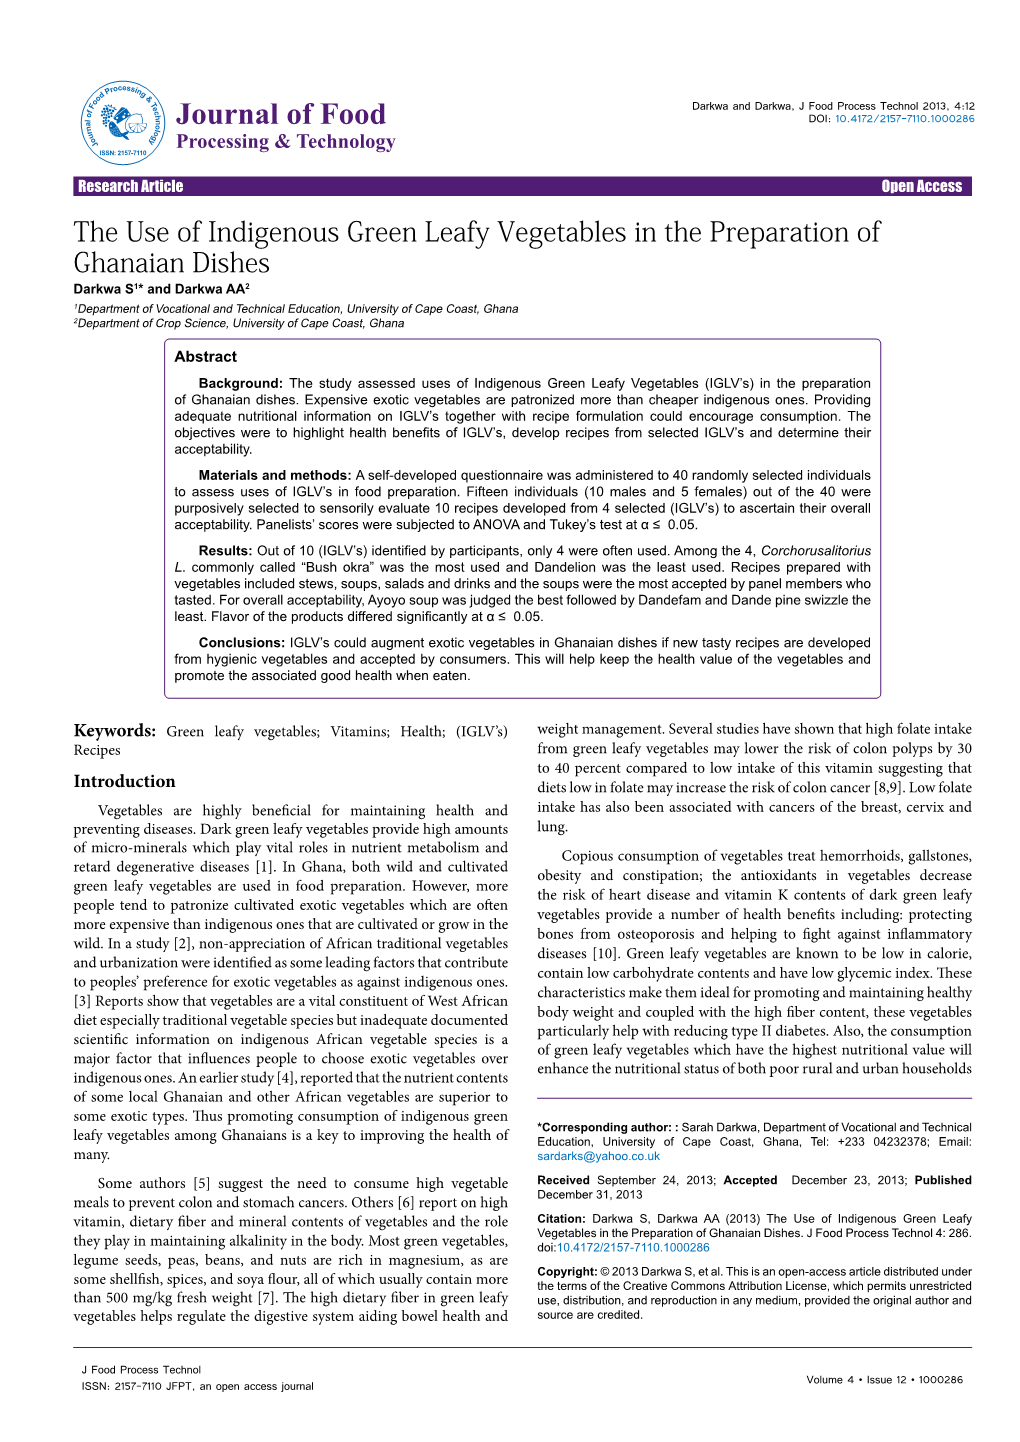 The Use of Indigenous Green Leafy Vegetables in the Preparation Of